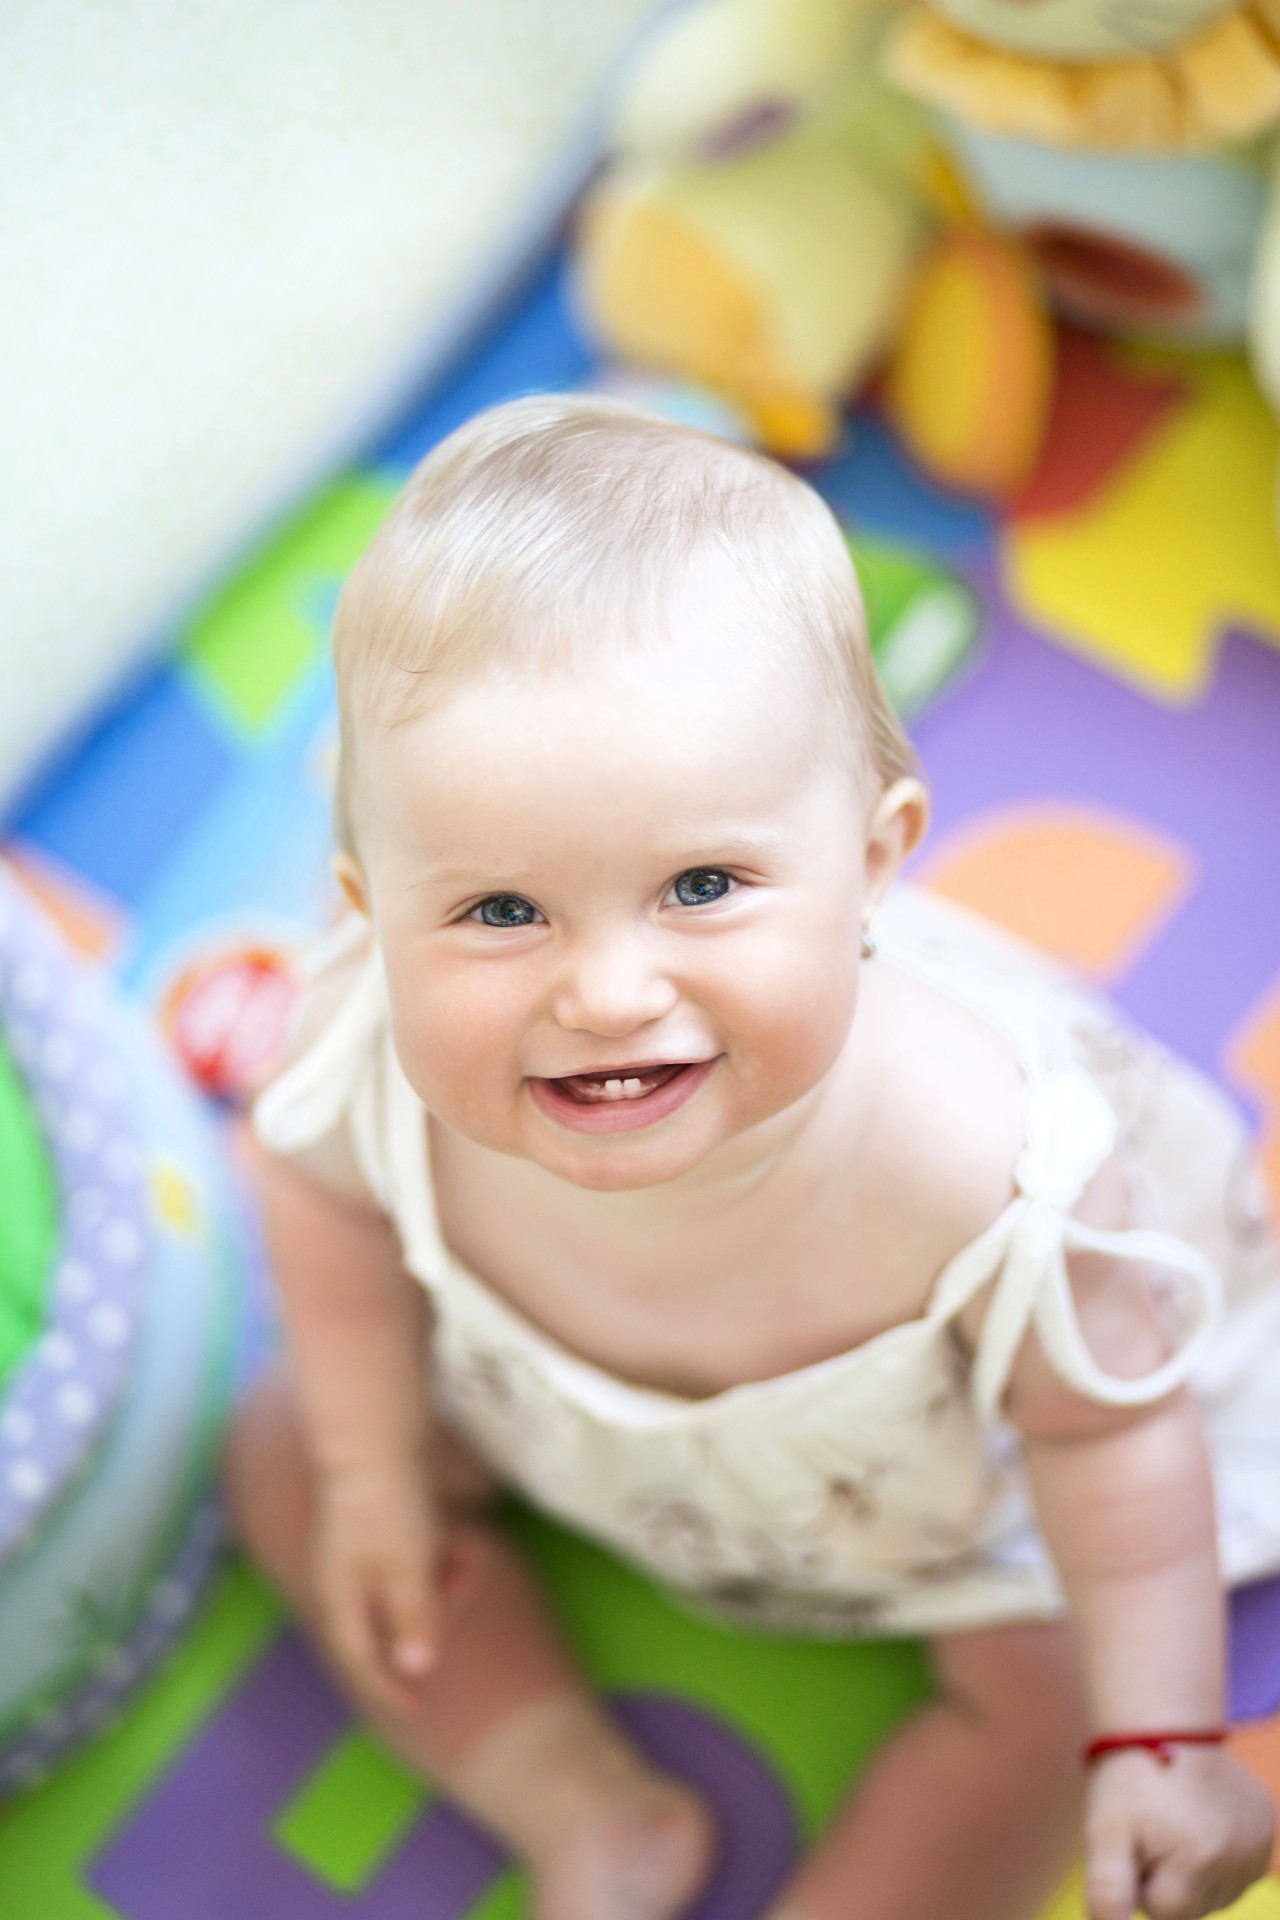 Smiling Baby With Toys Free Stock Photo - Public Domain Pictures